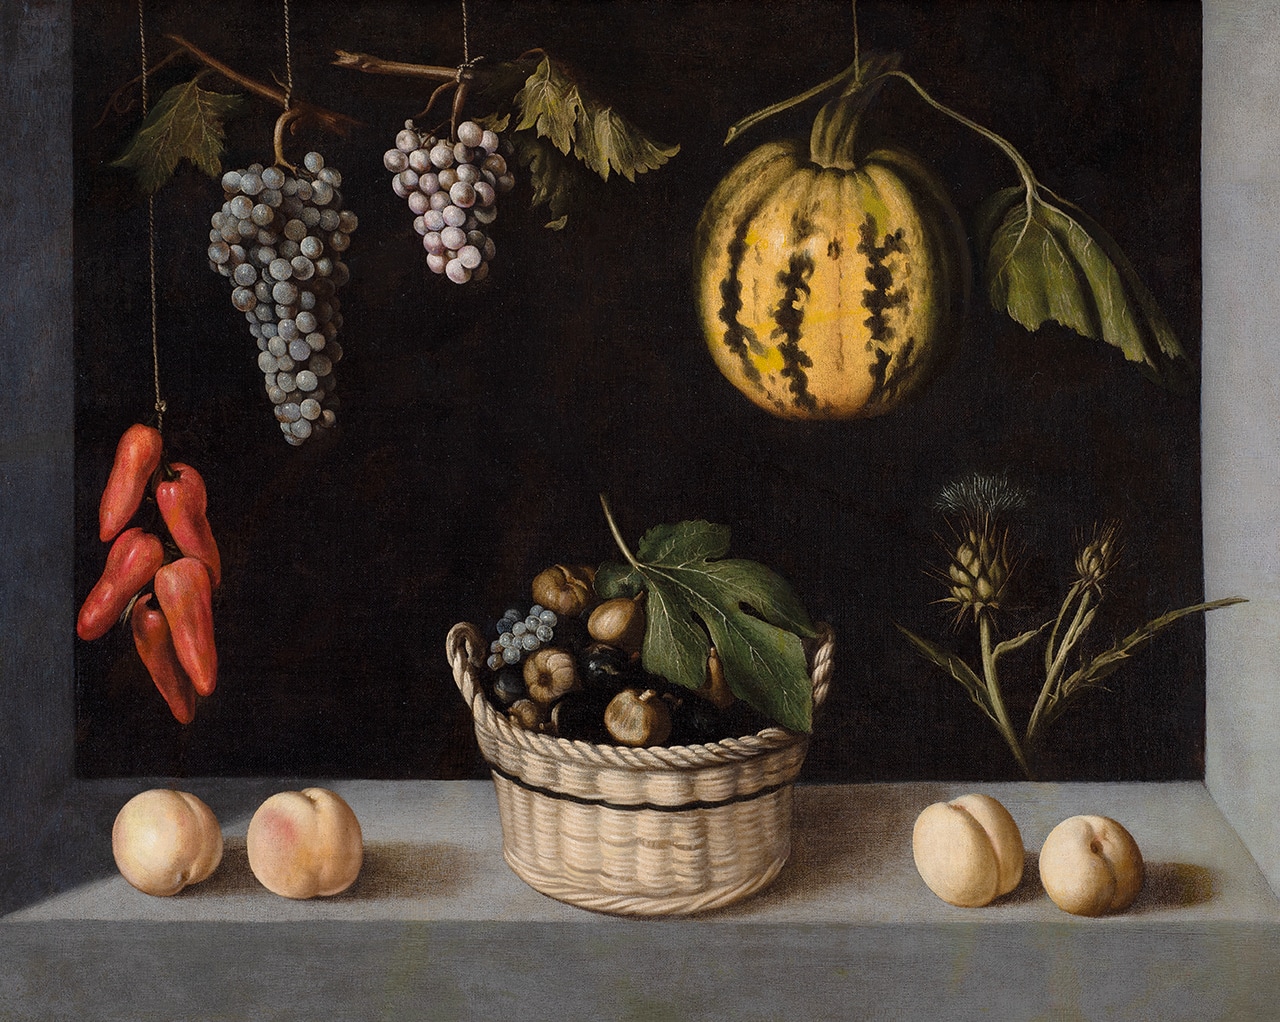 Still Life with Basket of Fruit, Melon and Grapes